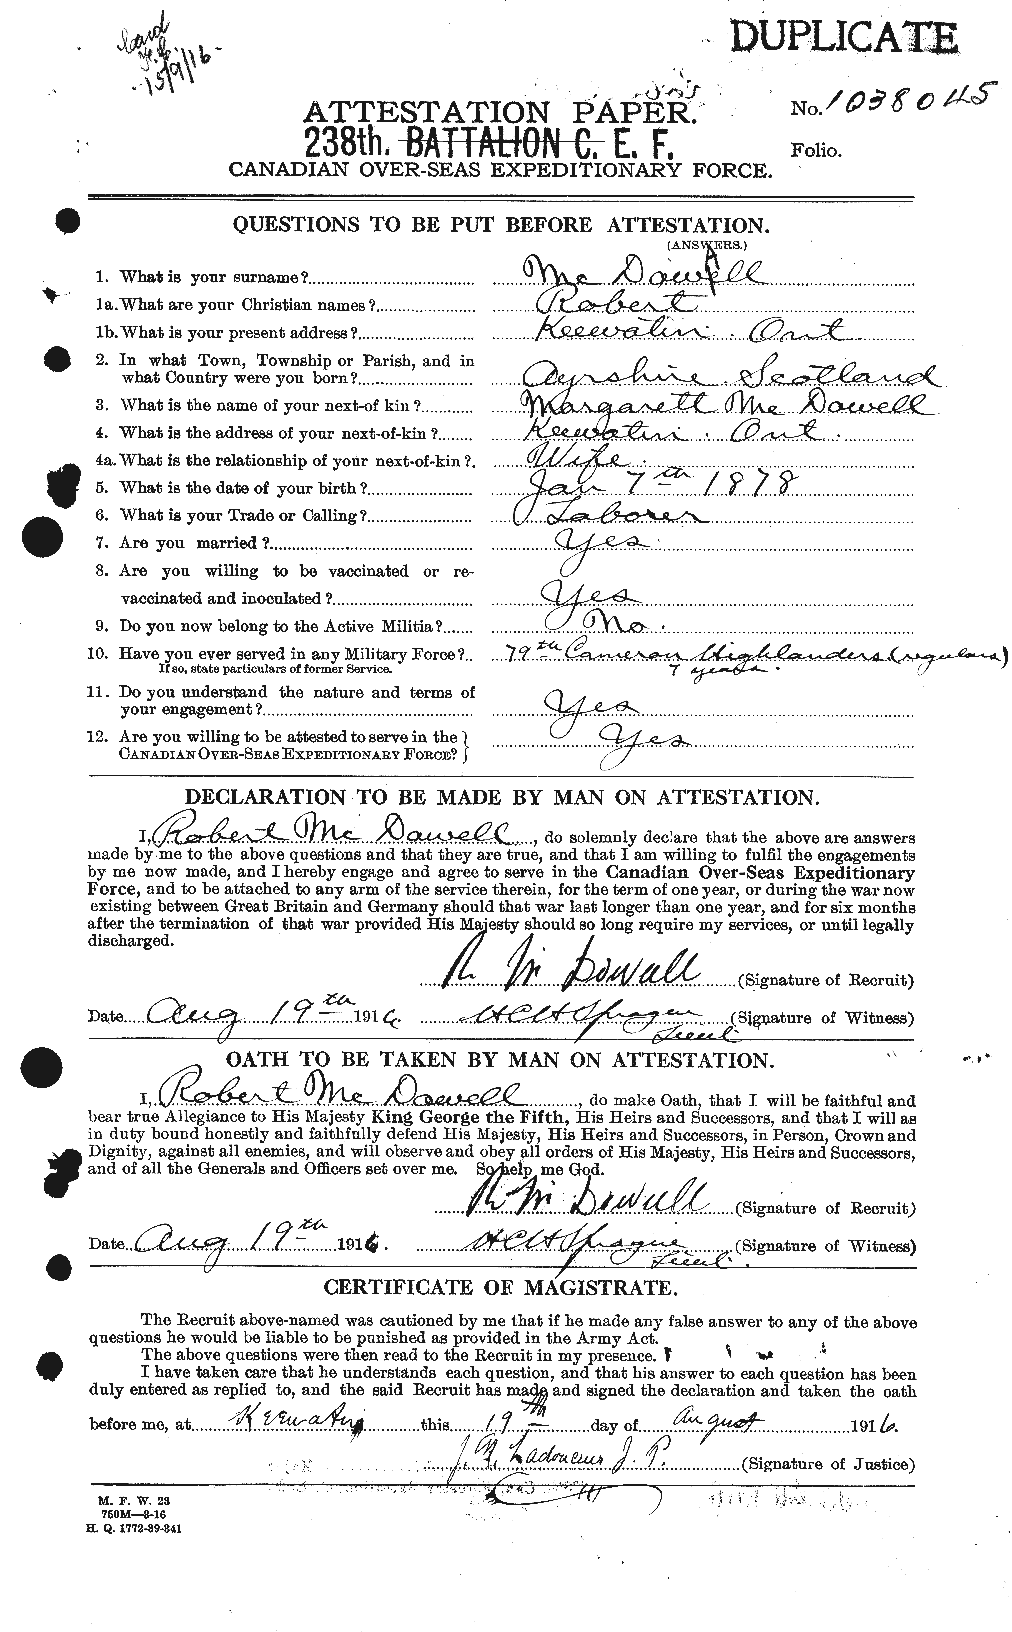 Personnel Records of the First World War - CEF 520593a